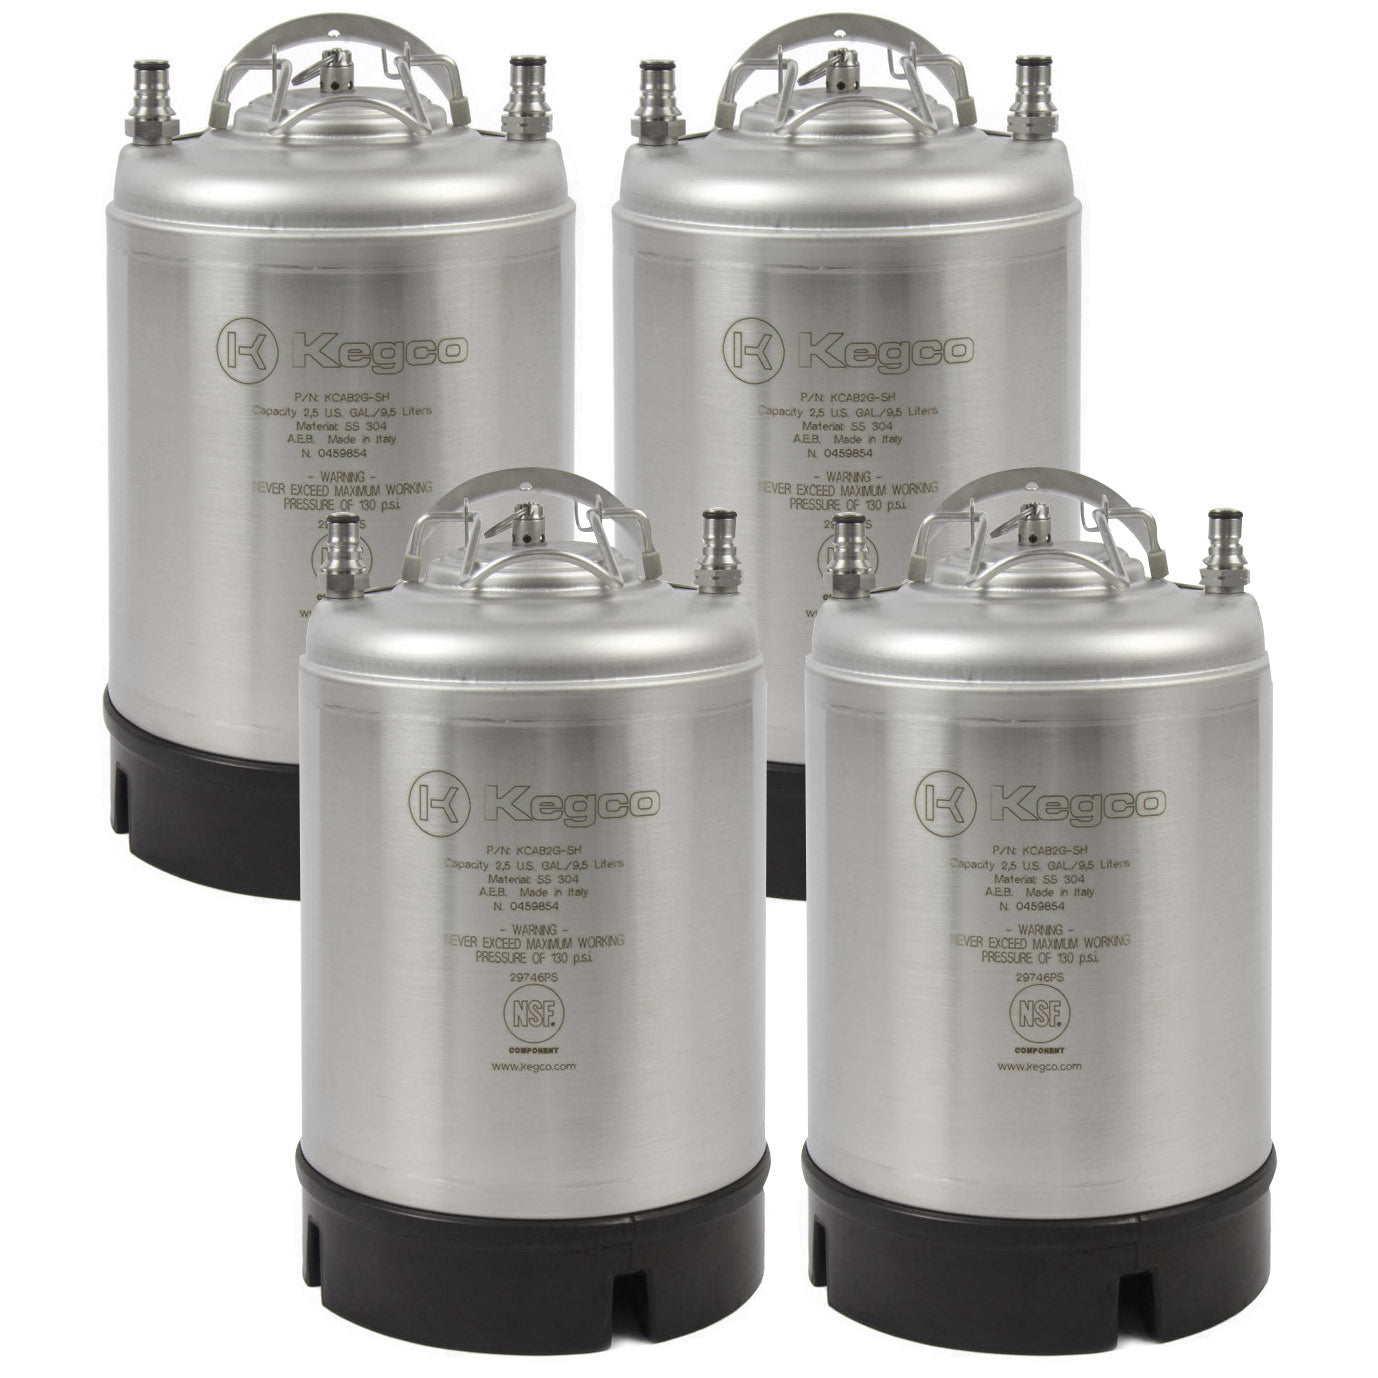 NSF Approved 2.5 Gallon Ball Lock Keg with Strap Handle - Set of 4